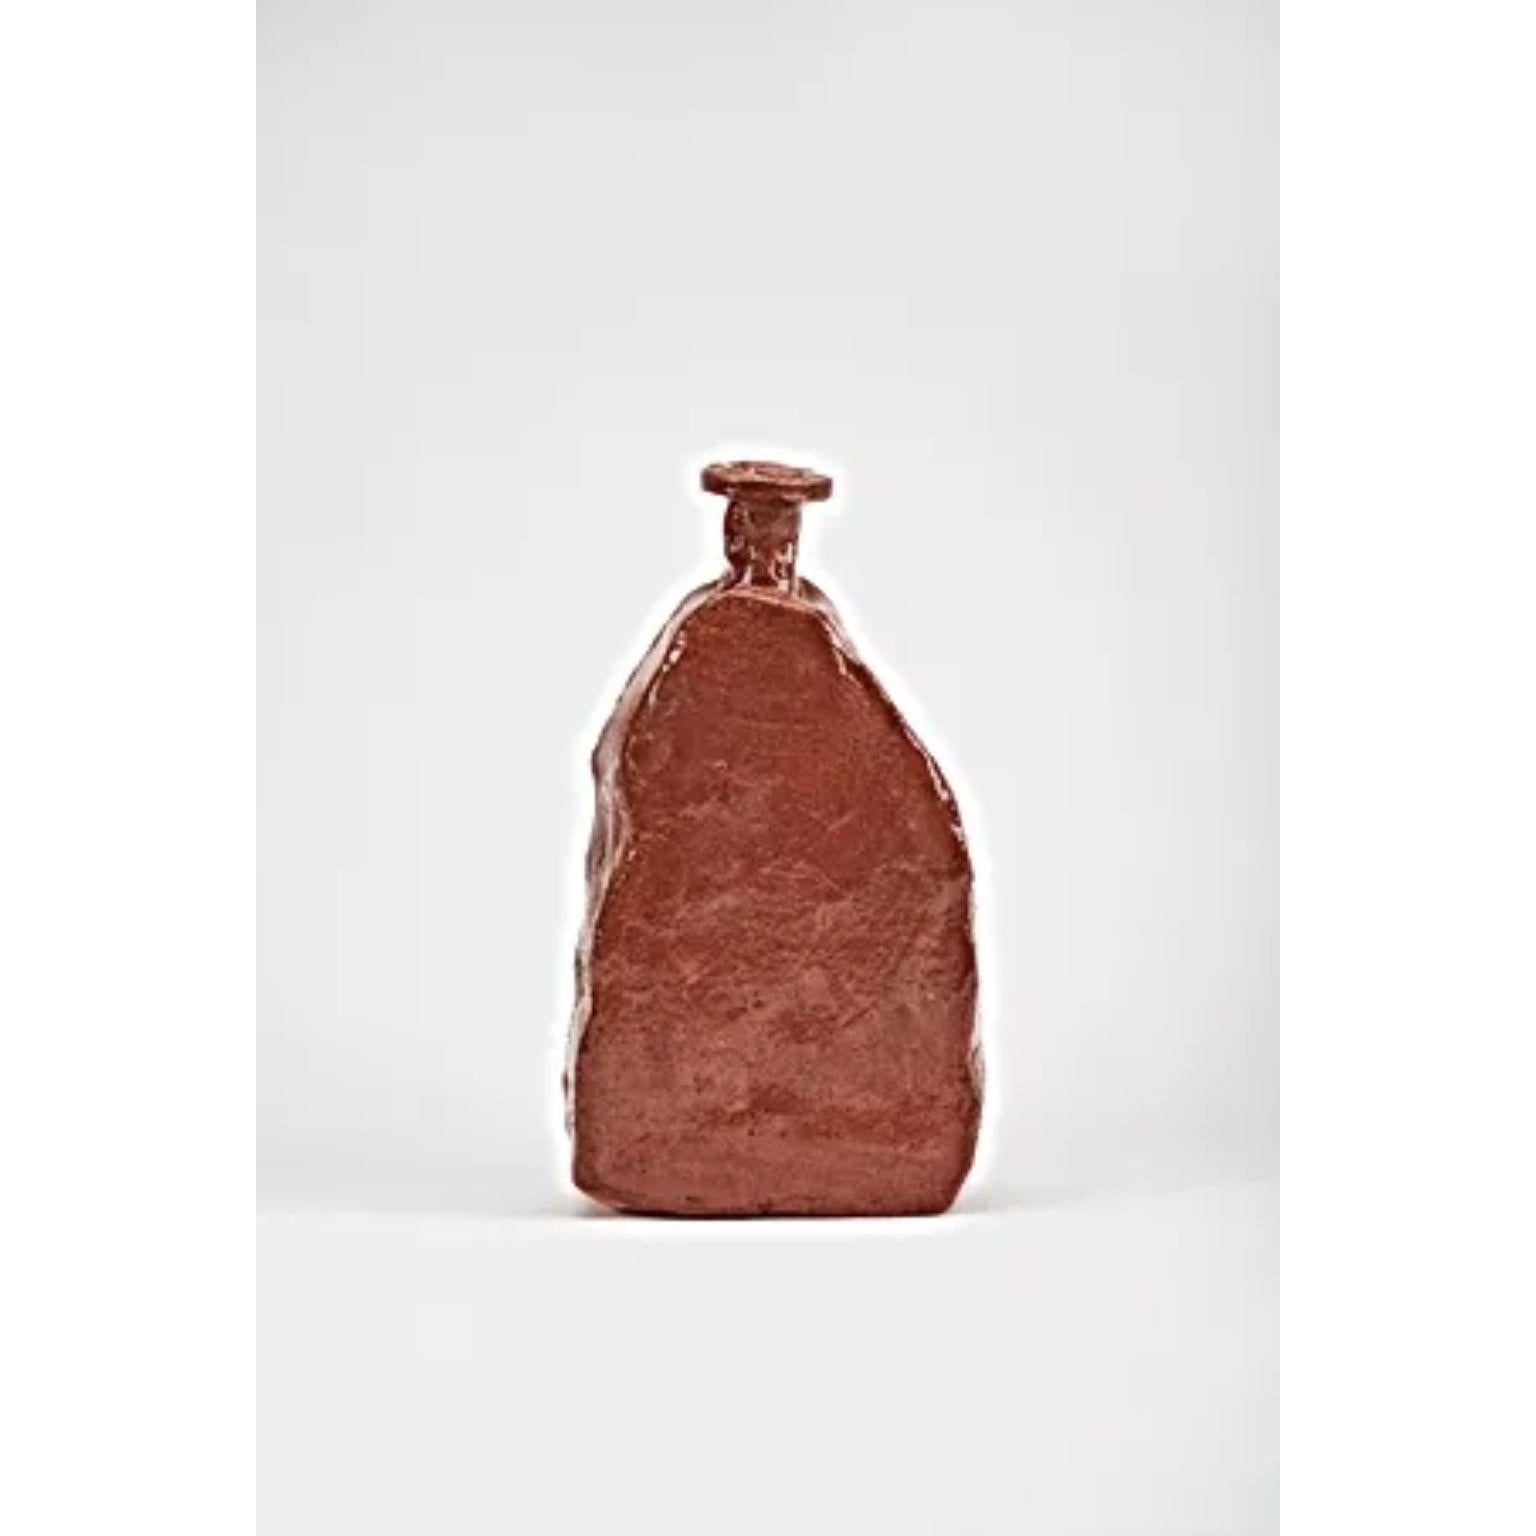 Aloi Medium Vase by Willem Van Hooff
Dimensions: W 35 x D 10 x H 32 cm (Dimensions may vary as pieces are hand-made and might present slight variations in sizes)
Materials: Earthenware, ceramic, pigments and glaze.

Willem van Hooff is a designer